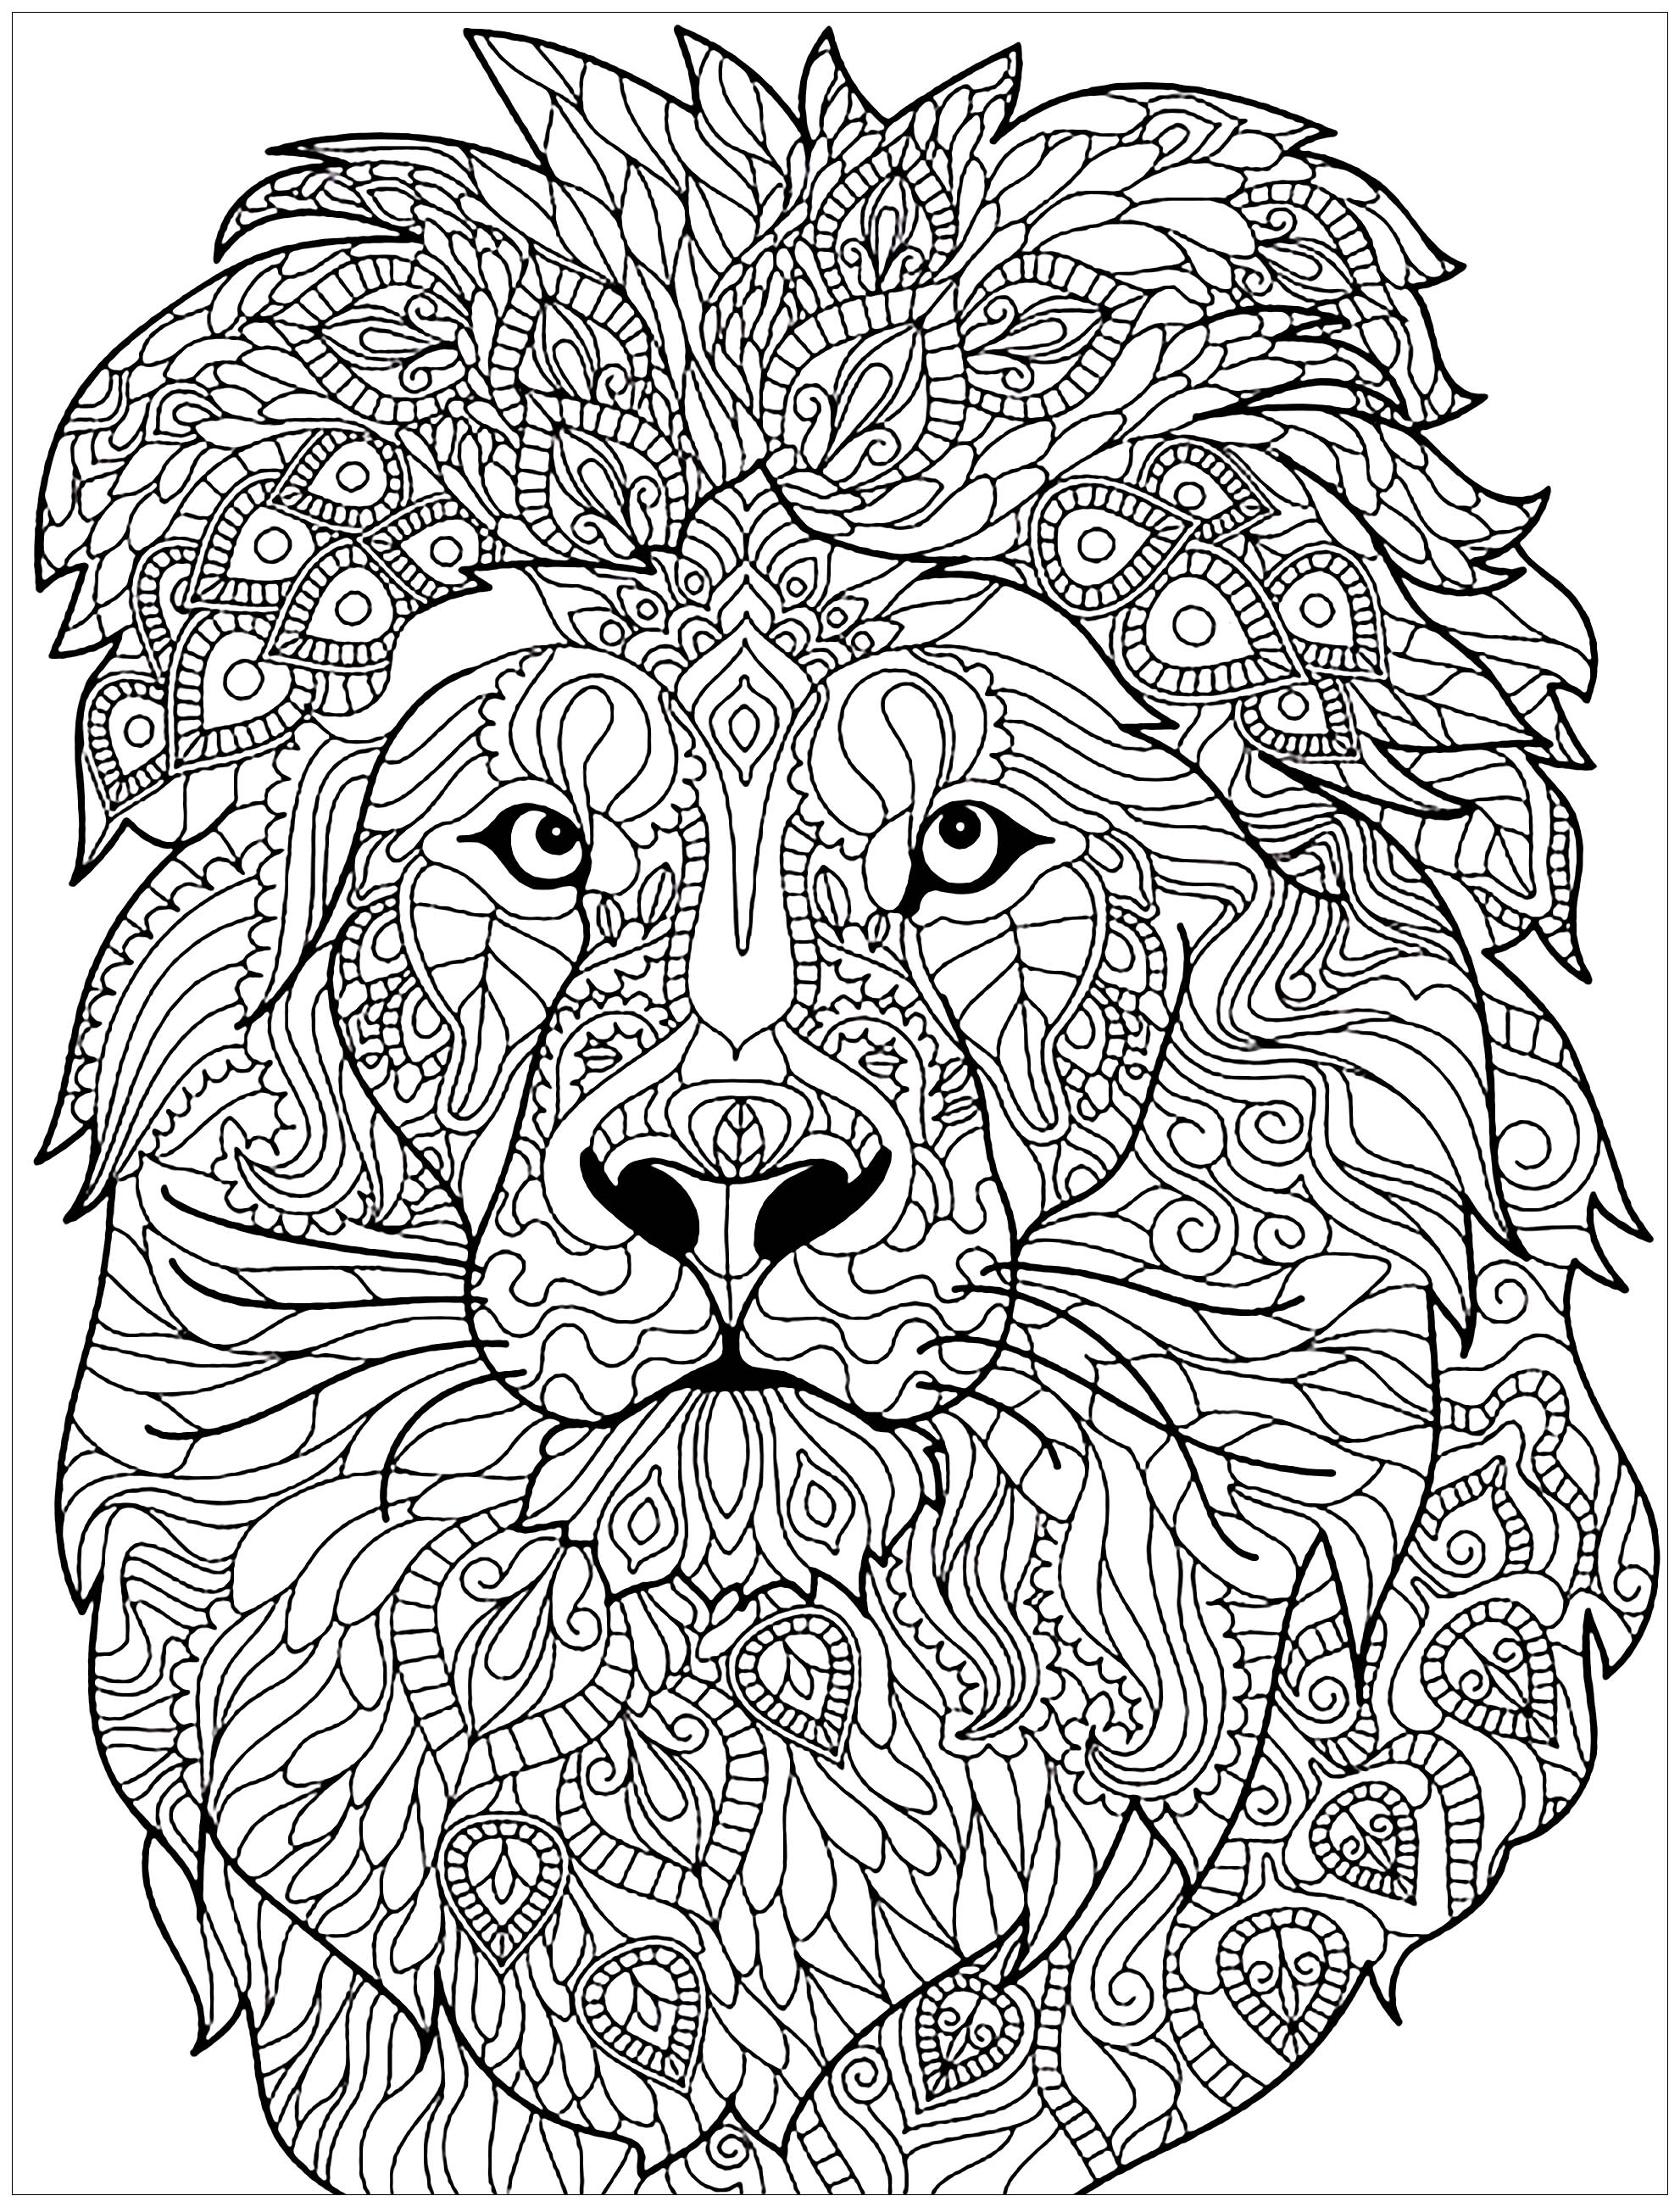 Adult Coloring Pages Lion at GetDrawings | Free download